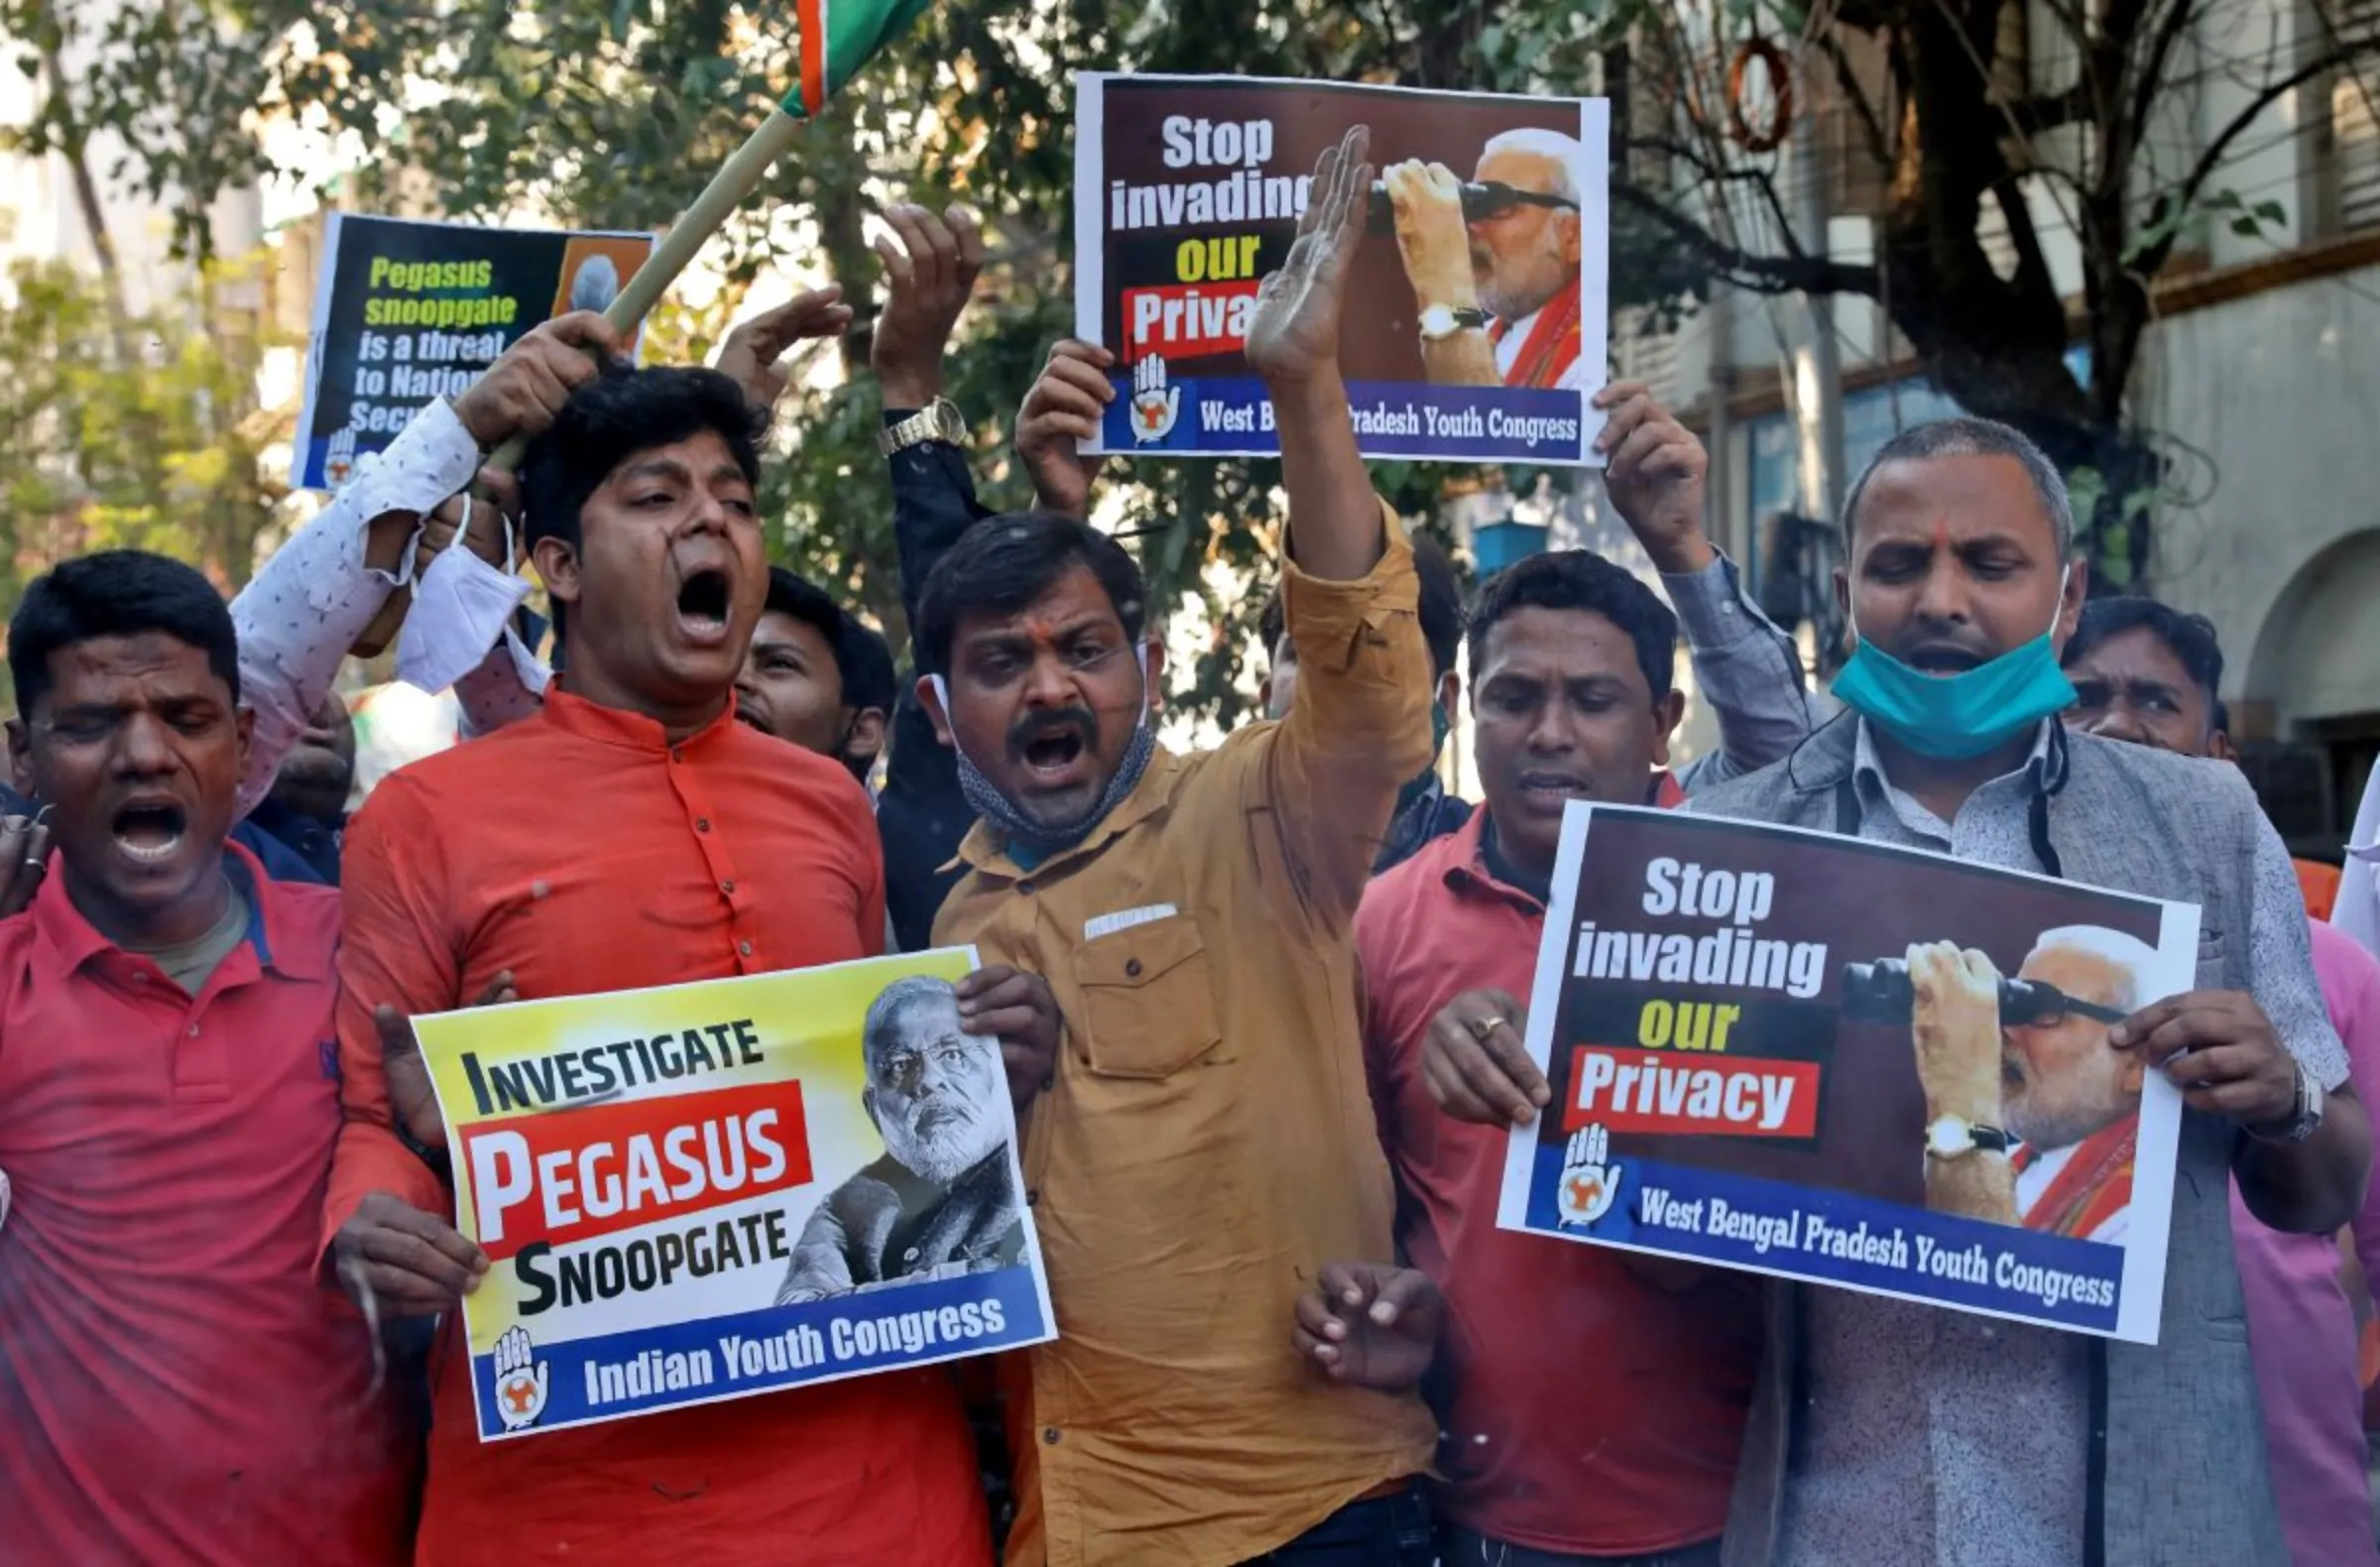 Supporters of India's main opposition Congress party hold placards as they shout slogans against India's Prime Minister Narendra Modi during a protest against what they say is use of Pegasus to spy on activists, journalists and politicians, in Kolkata, India, February 2, 2022